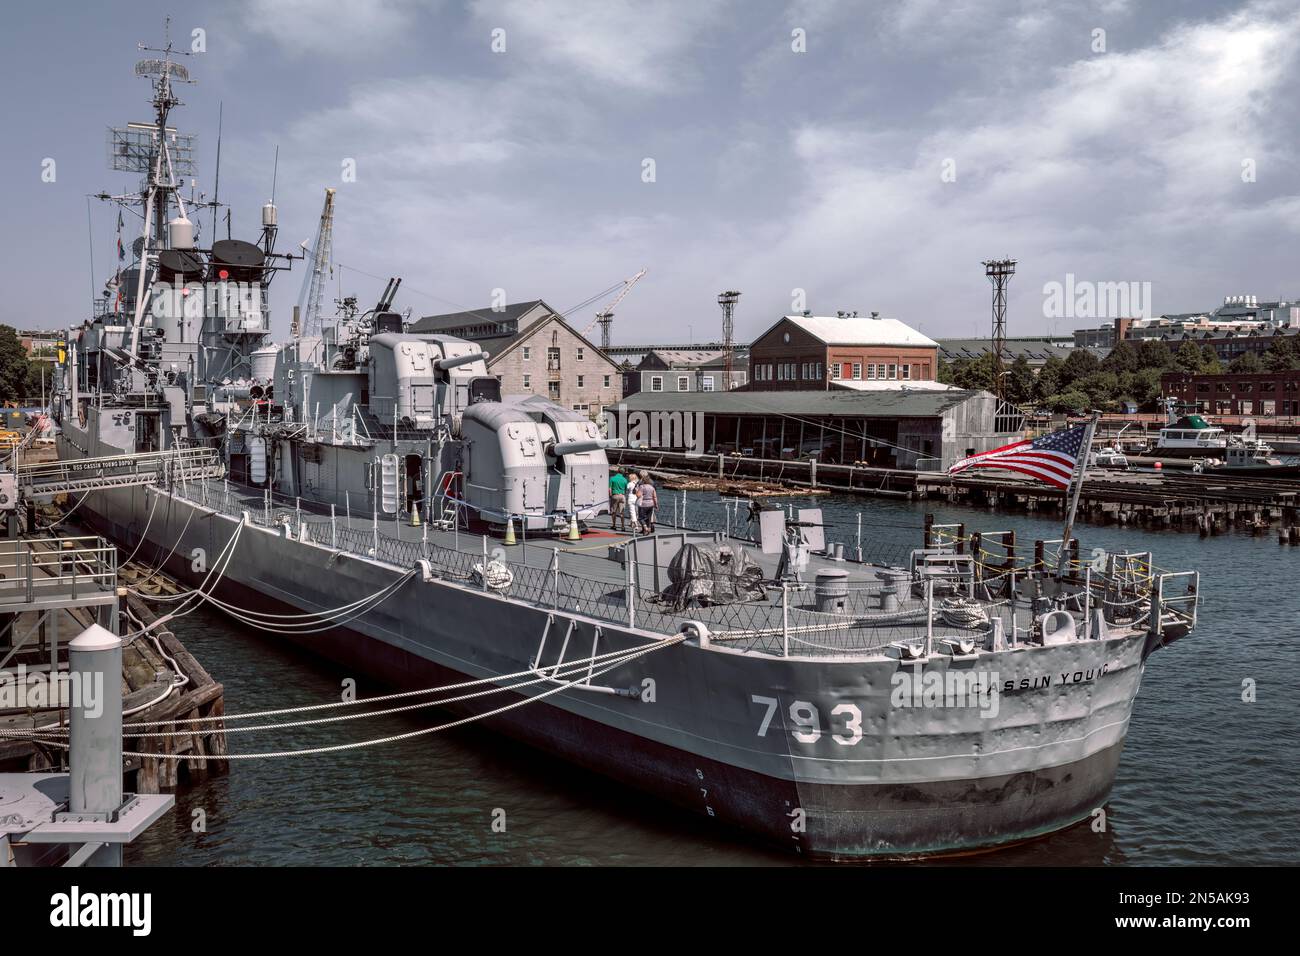 National Historical Park, Boston, Massachusetts - USS Cassin Young is a Fletcher-class destroyer of the U.S. Navy named after Captain Cassin Young. Yo Stock Photo